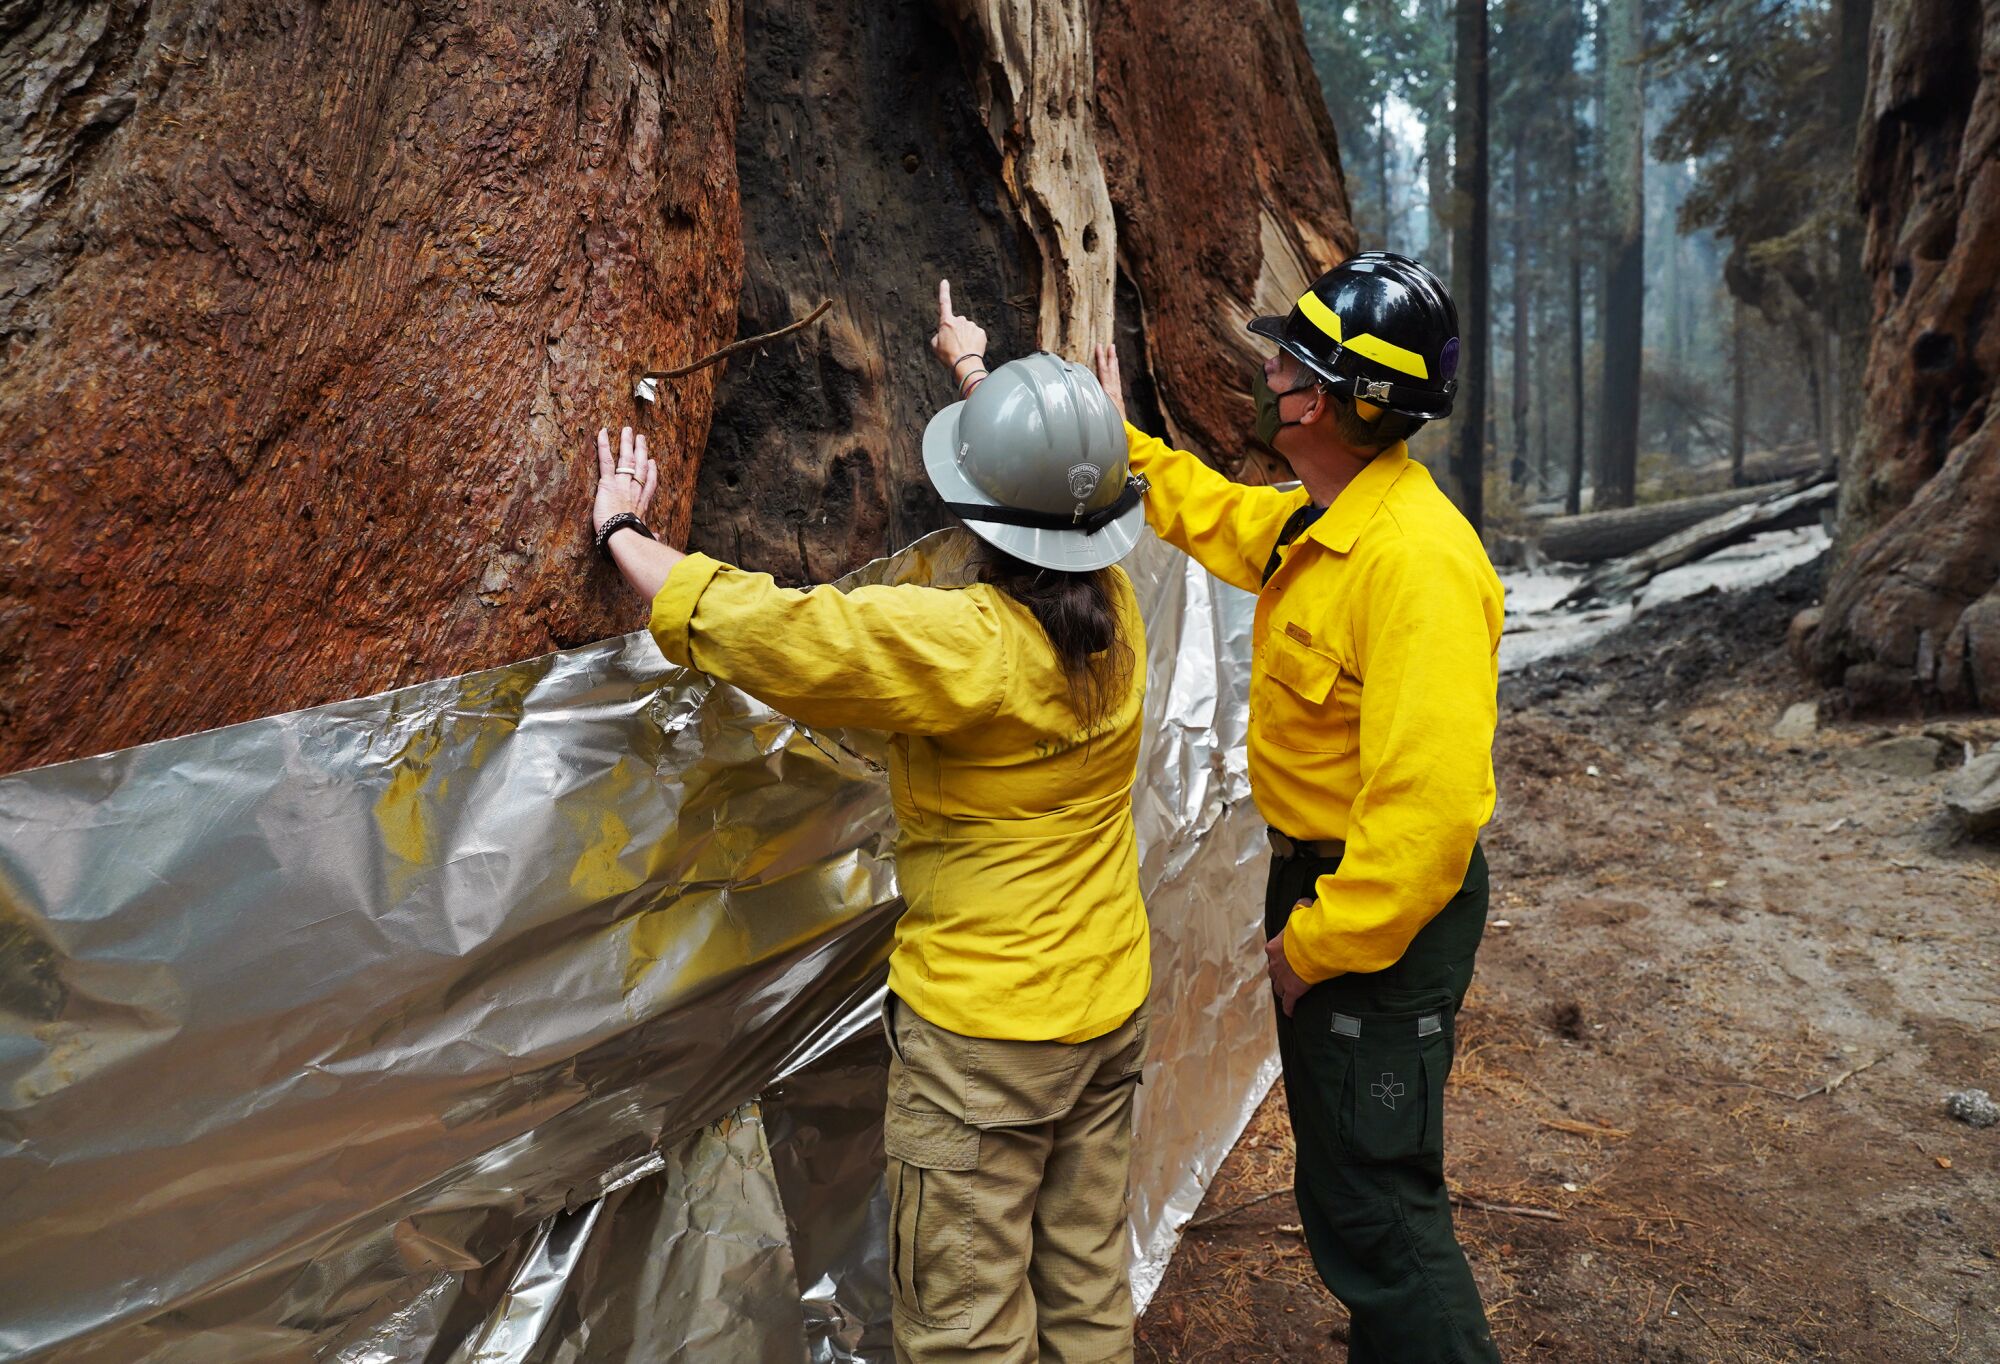 Two people inspect a burn scar at the base of a large tree trunk